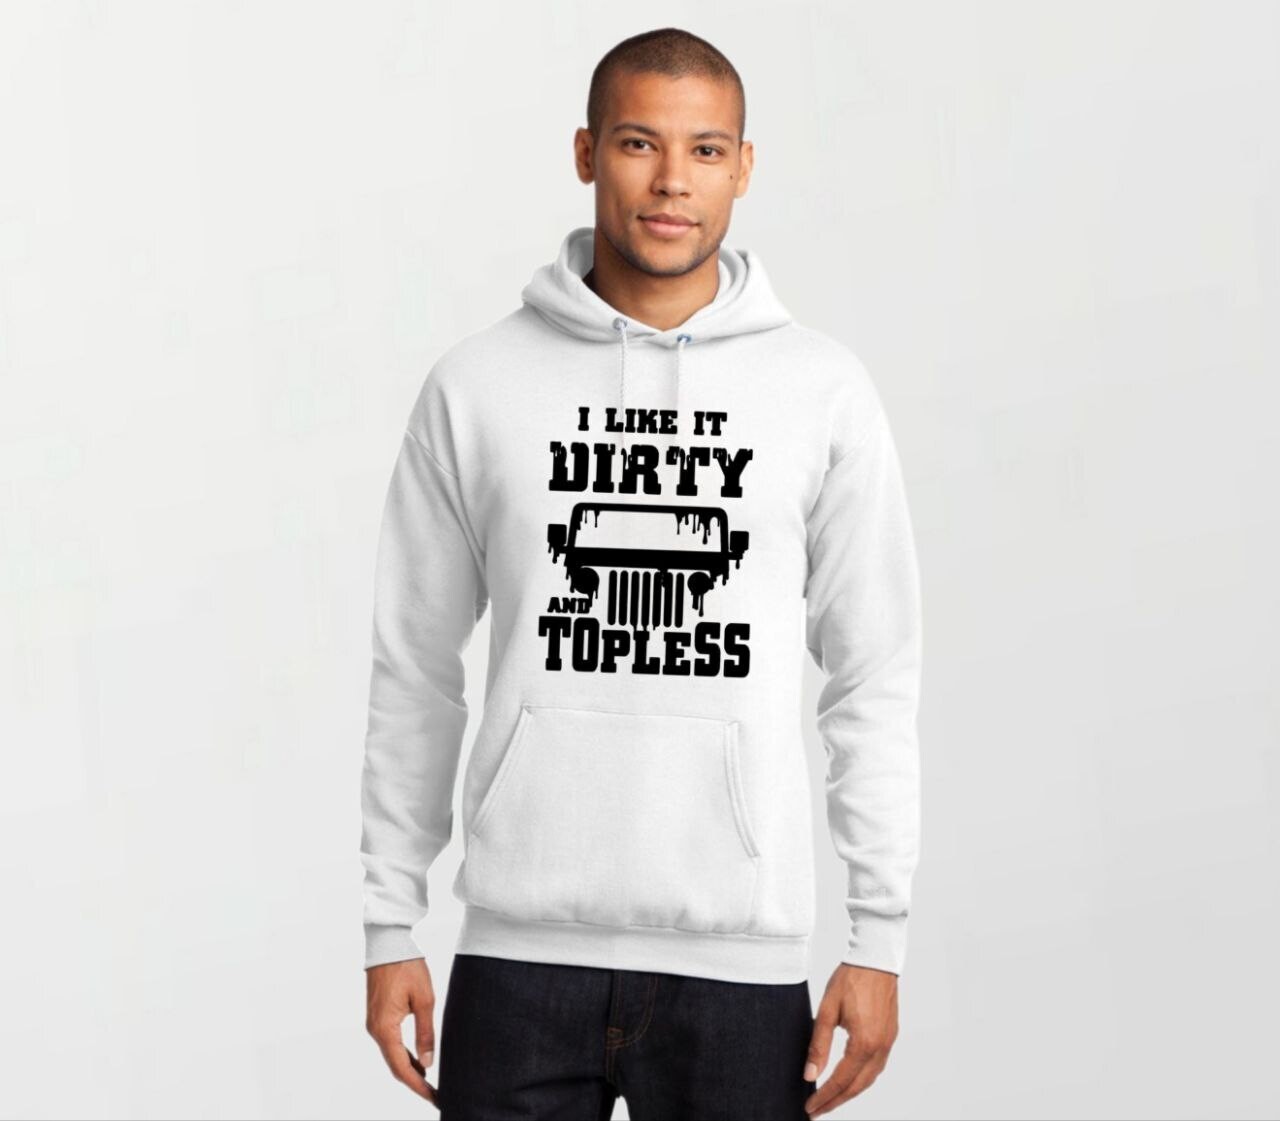 Dirty and topless_Elite Hoodie white